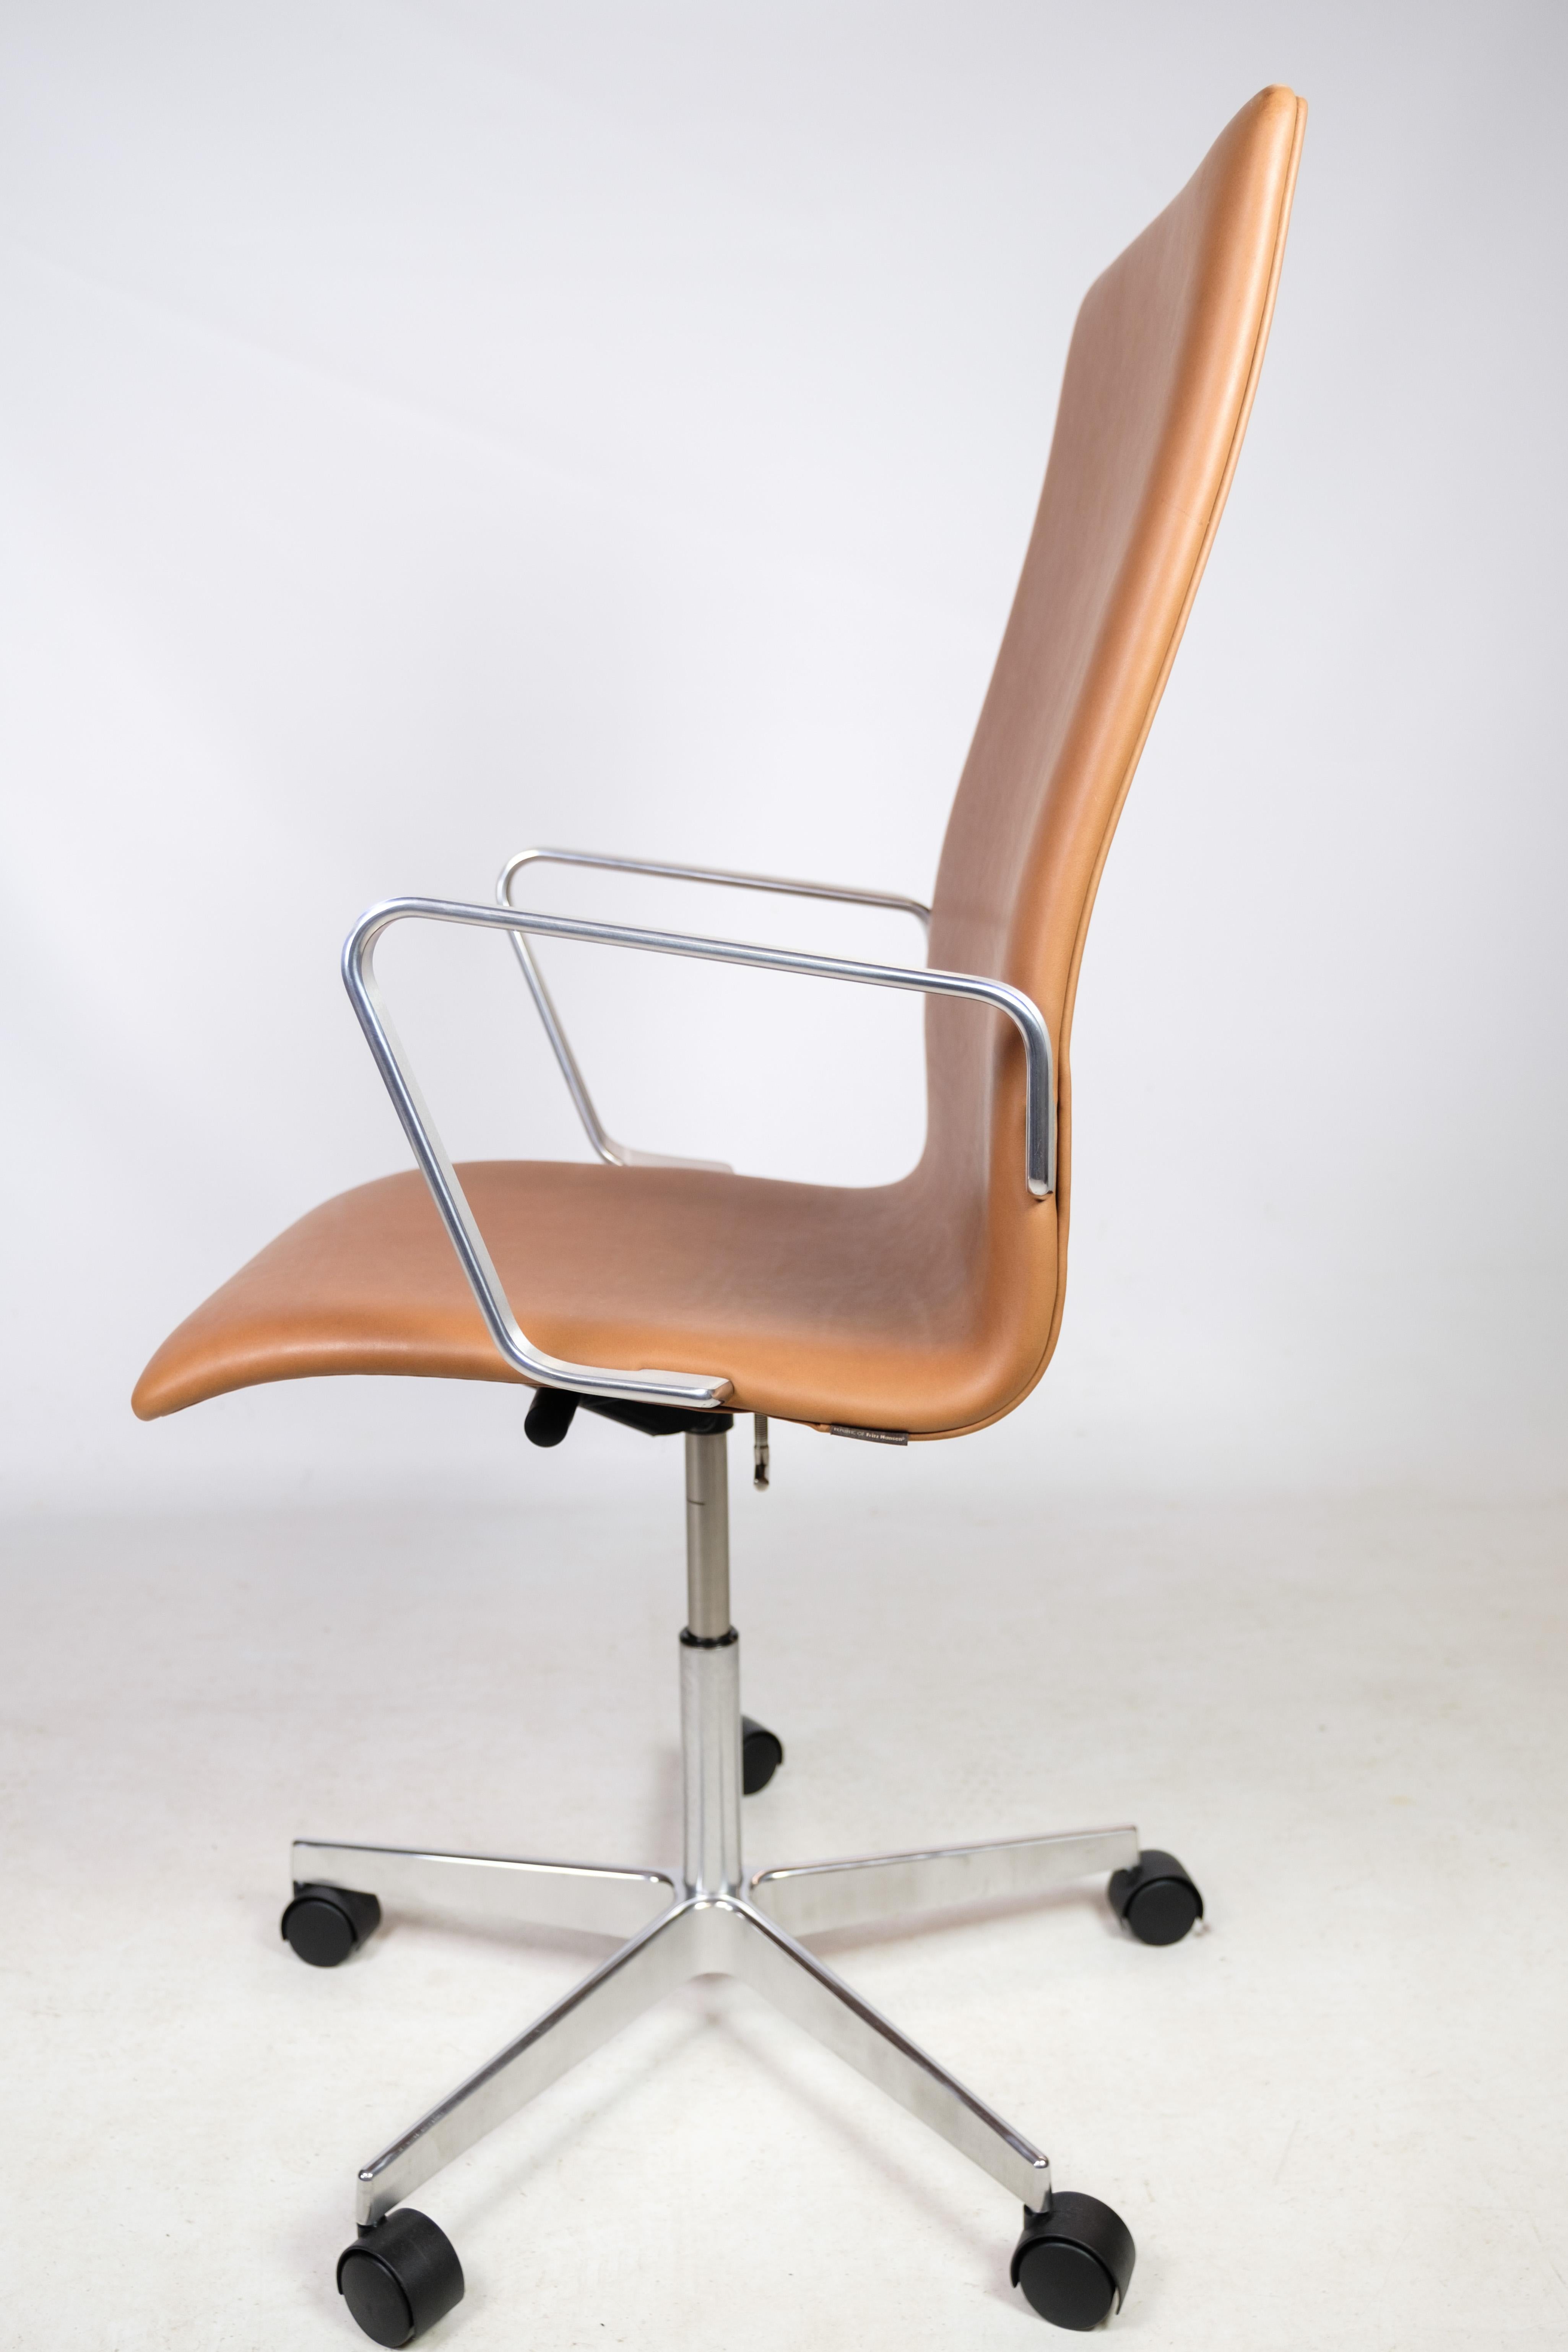 Mid-Century Modern Oxford Classic Office Chair, Model 3293c, Cognac Leather, Arne Jacobsen, 1963 For Sale